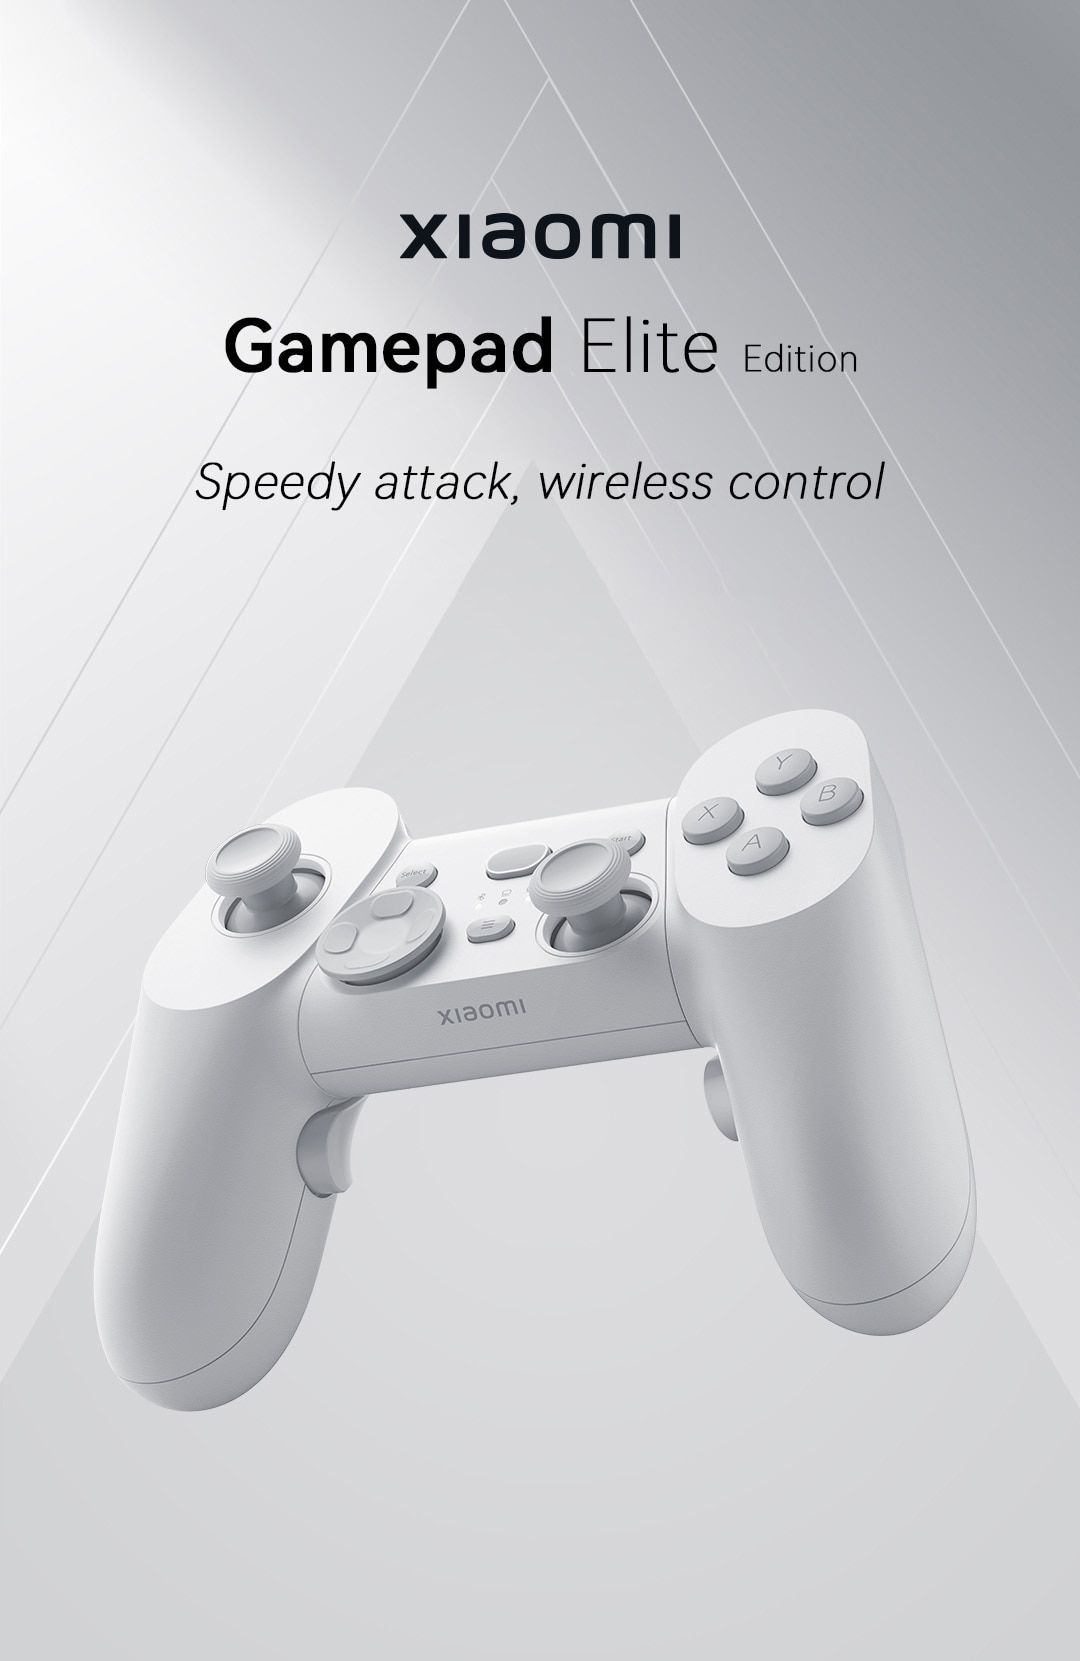 Original Xiaomi Gamepad Elite Edition For Android Phone Pad TV Win PC Game Bluetooth 2.4G ALPS Joystick 6-Axis Gyro Linear Motor in india